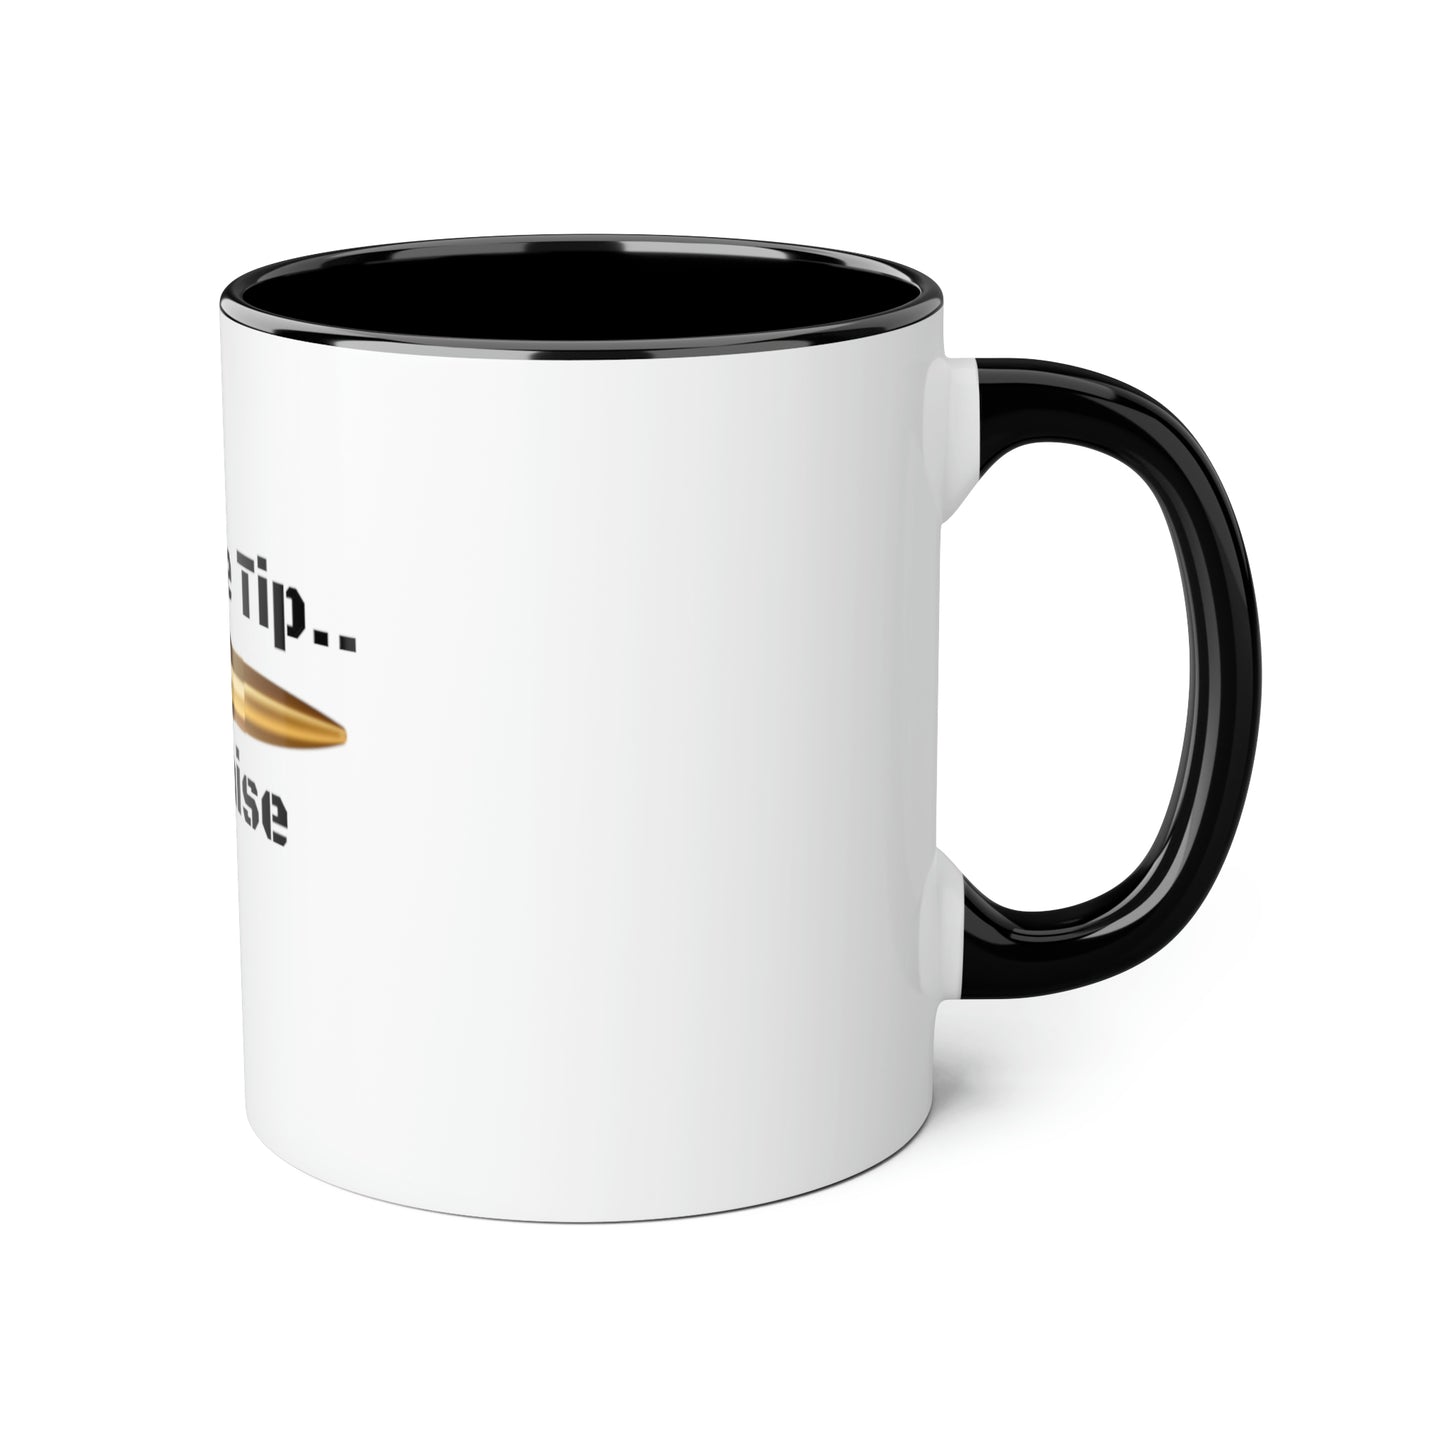 Just the Tip Accent Mugs, 11oz